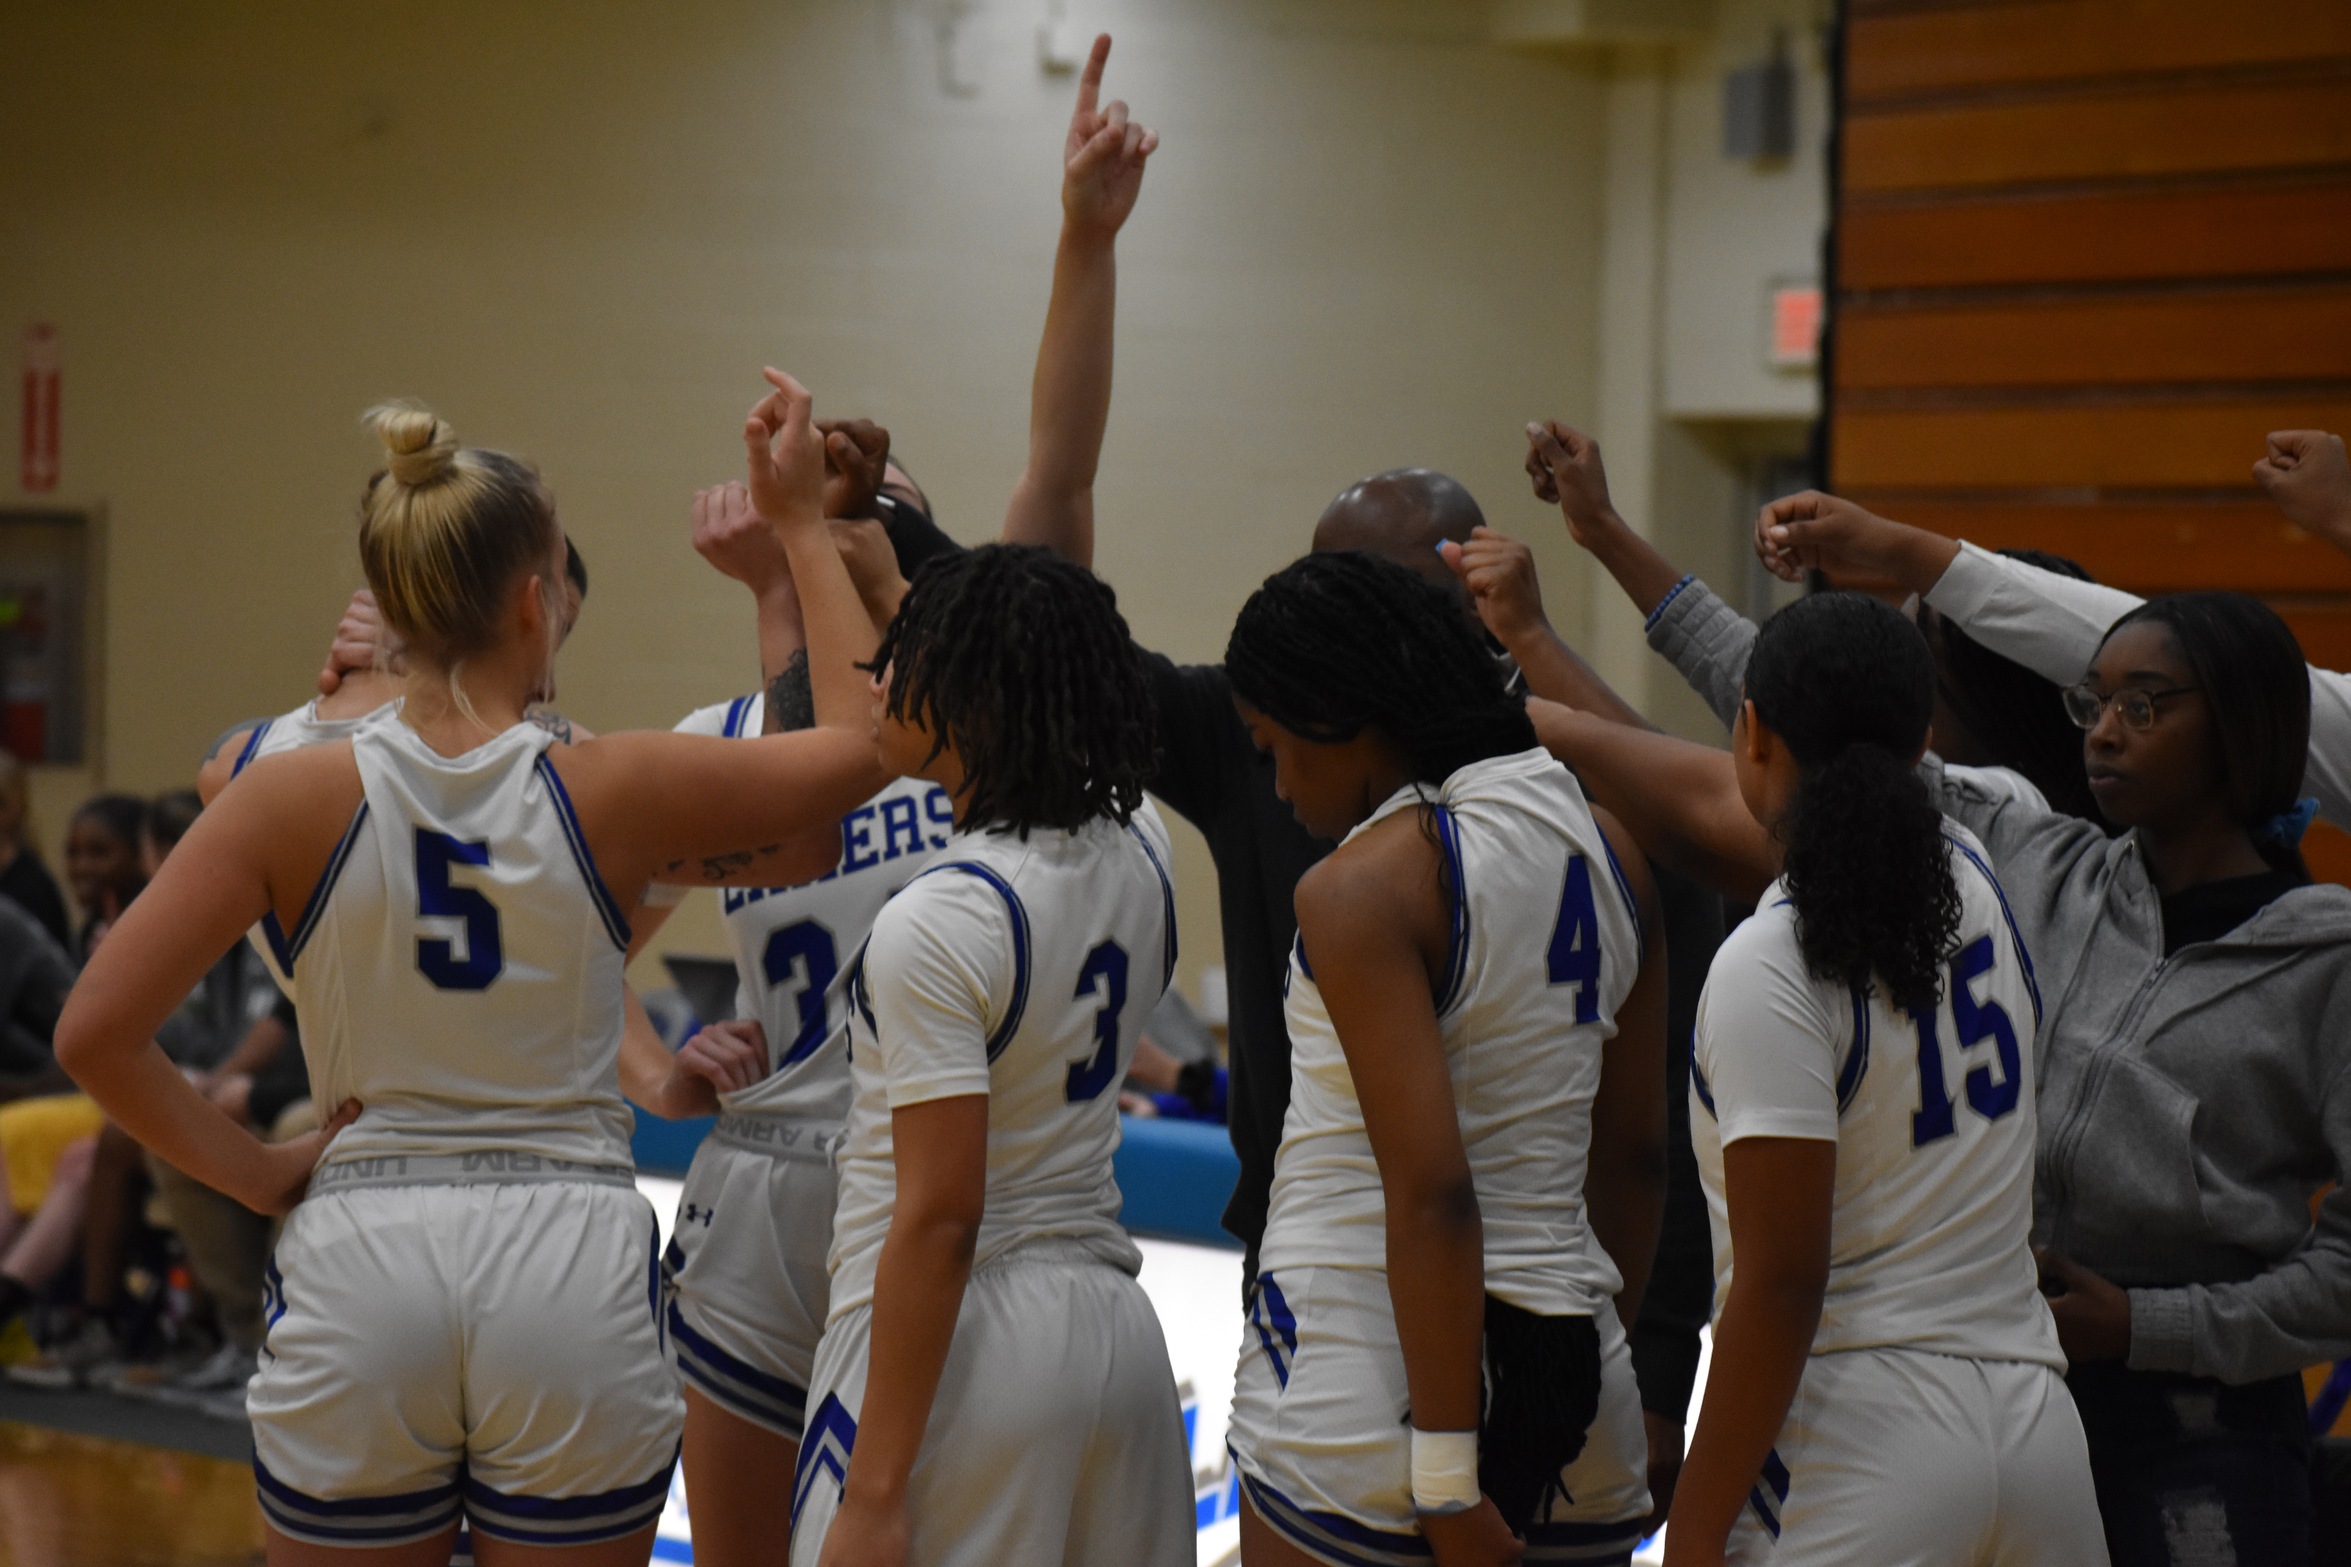 Lakers women's basketball negates Chargers to clinch share of OCCAC Title